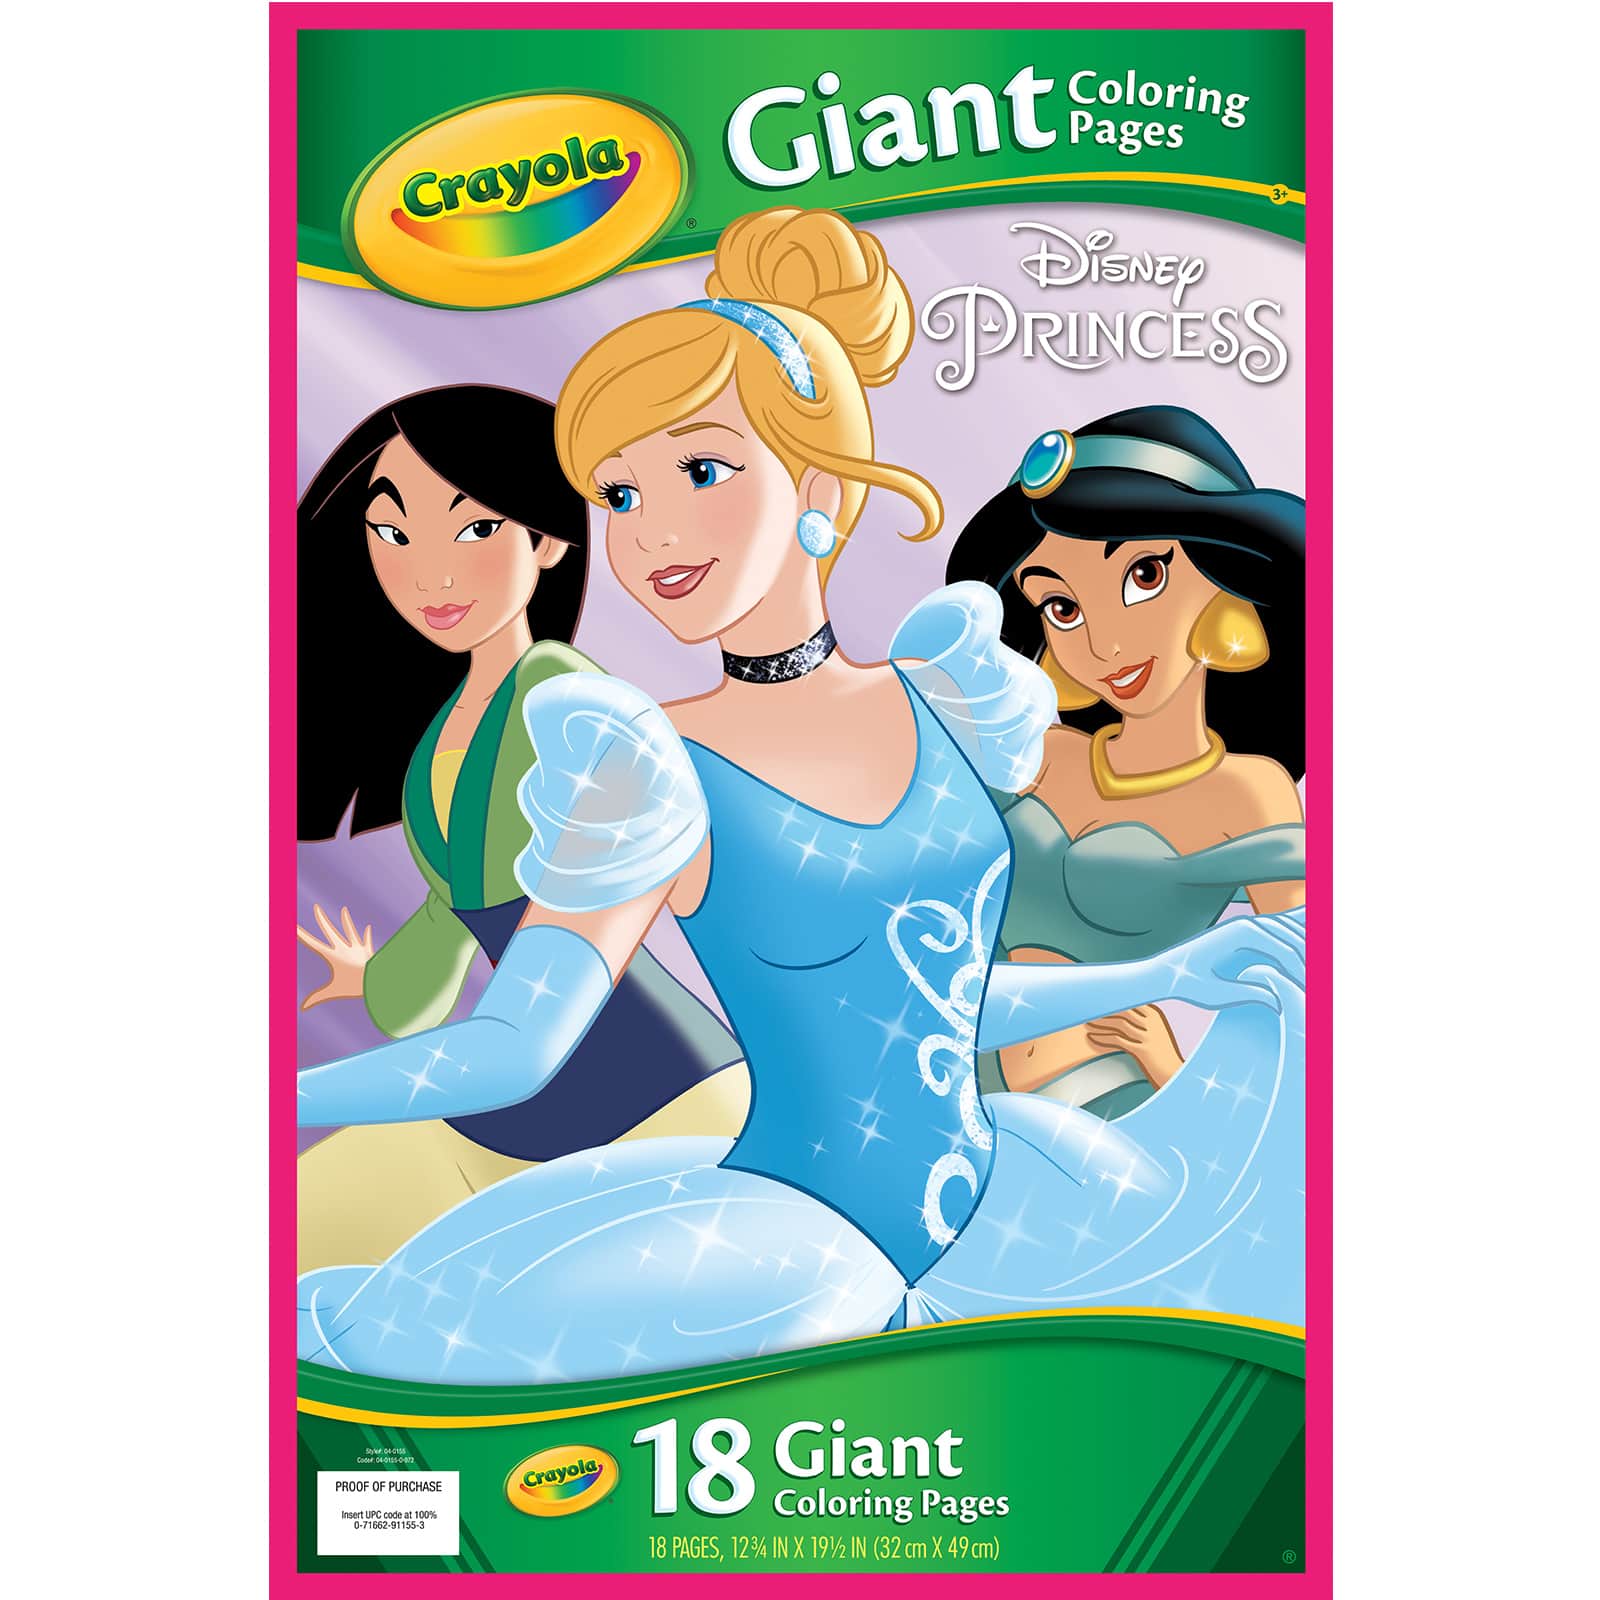 GIANT COLORING BOOK